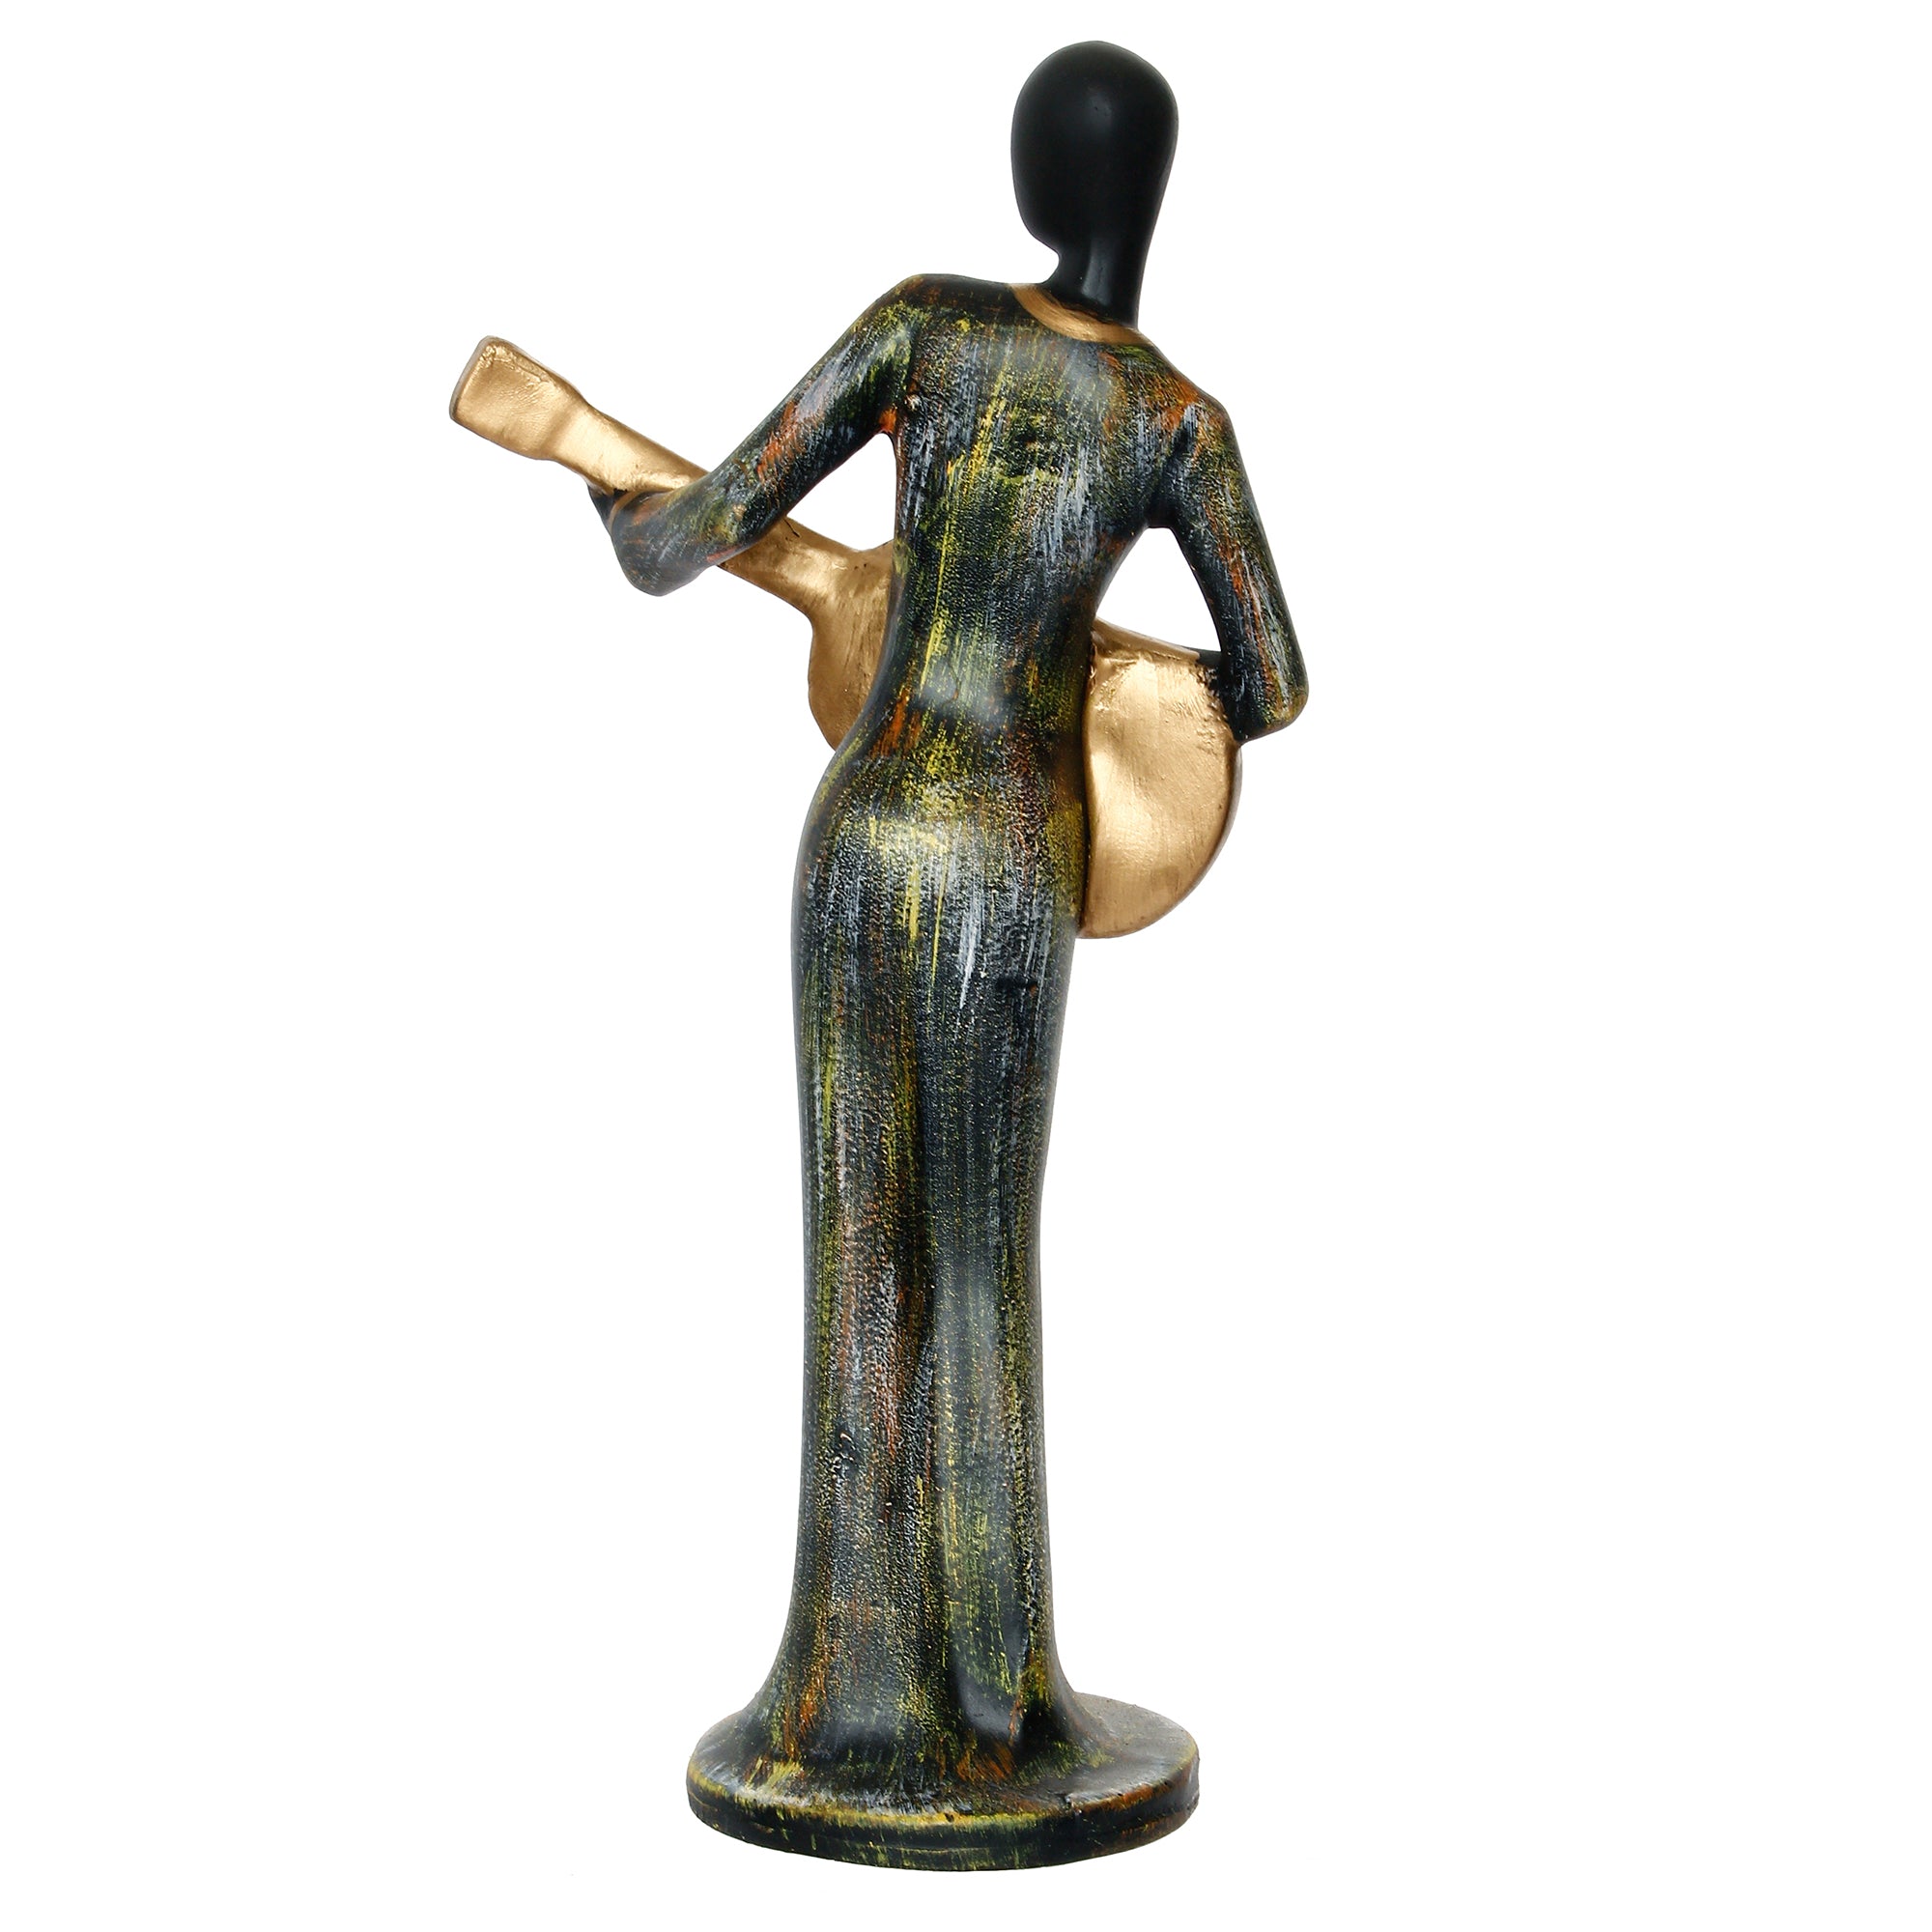 Grey and Black Polyresin Lady figurine Playing Guitar Musical Instrument Handcrafted Decorative Showpiece 6